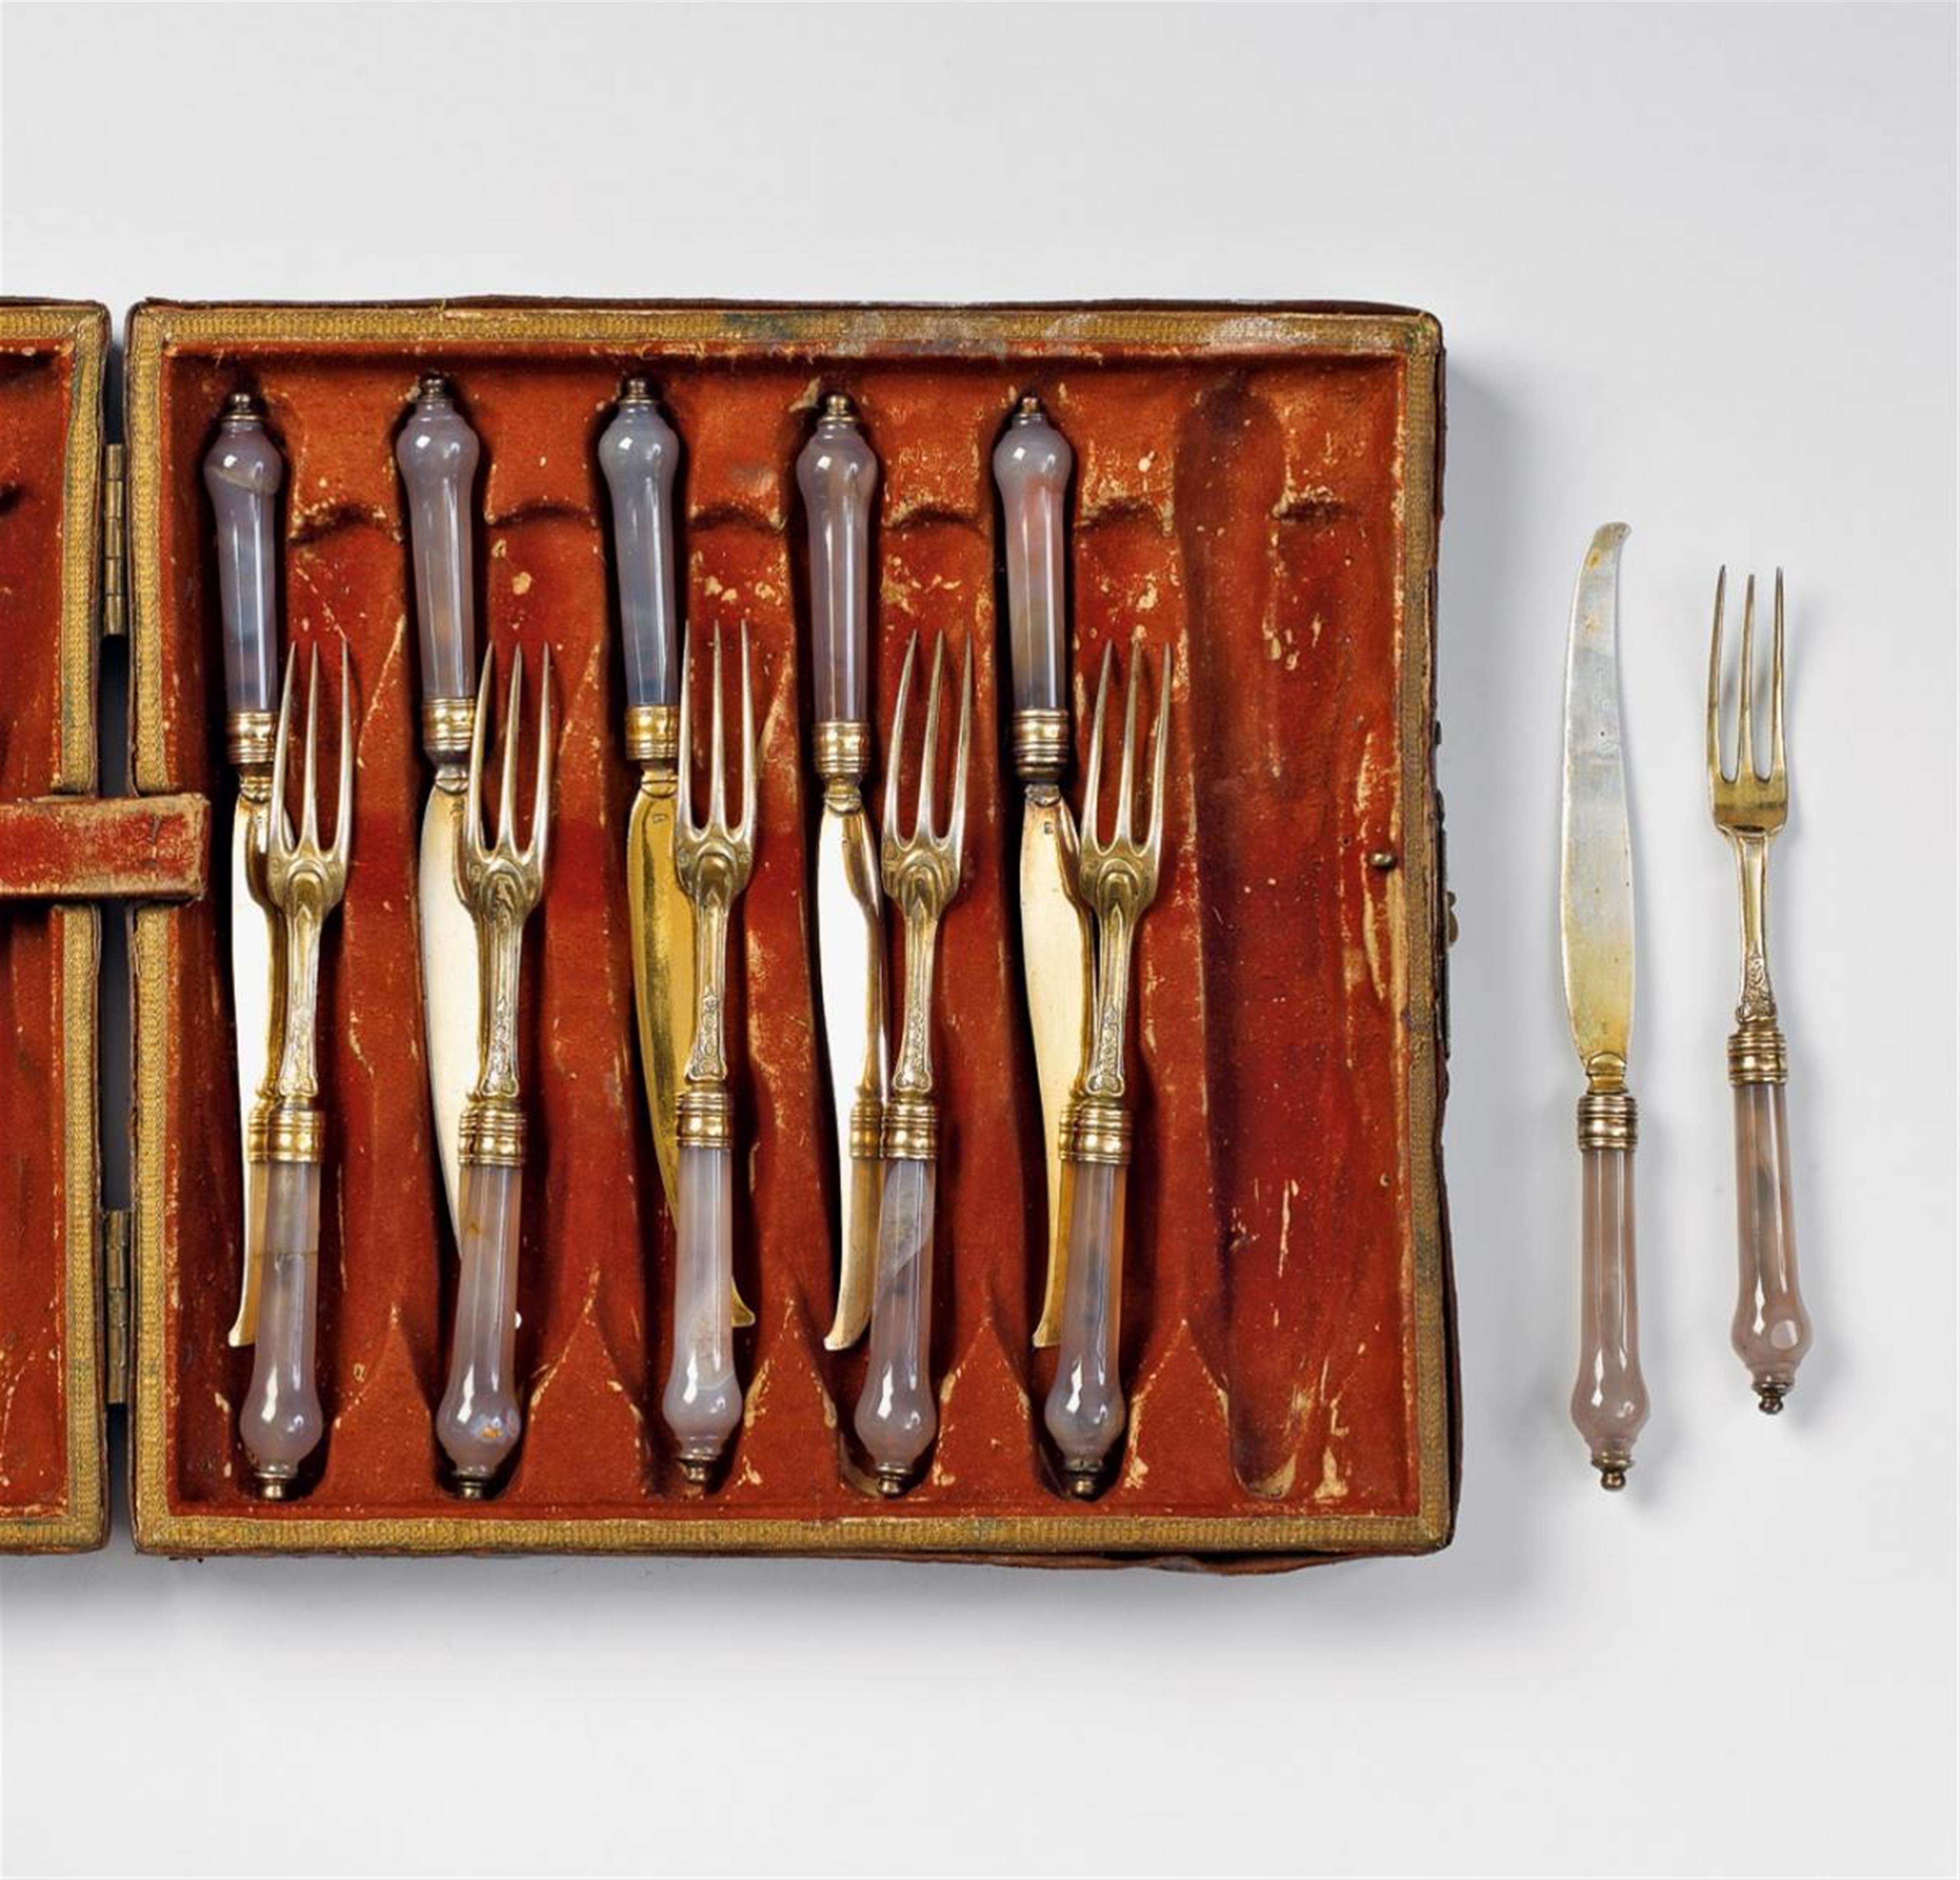 An Augsburg silver cutlery set with agate handles. Comprising six knives and forks in a fitted case (of the period but not original). Marks of Johann Ludwig Laminit 1739 - 41. - image-2